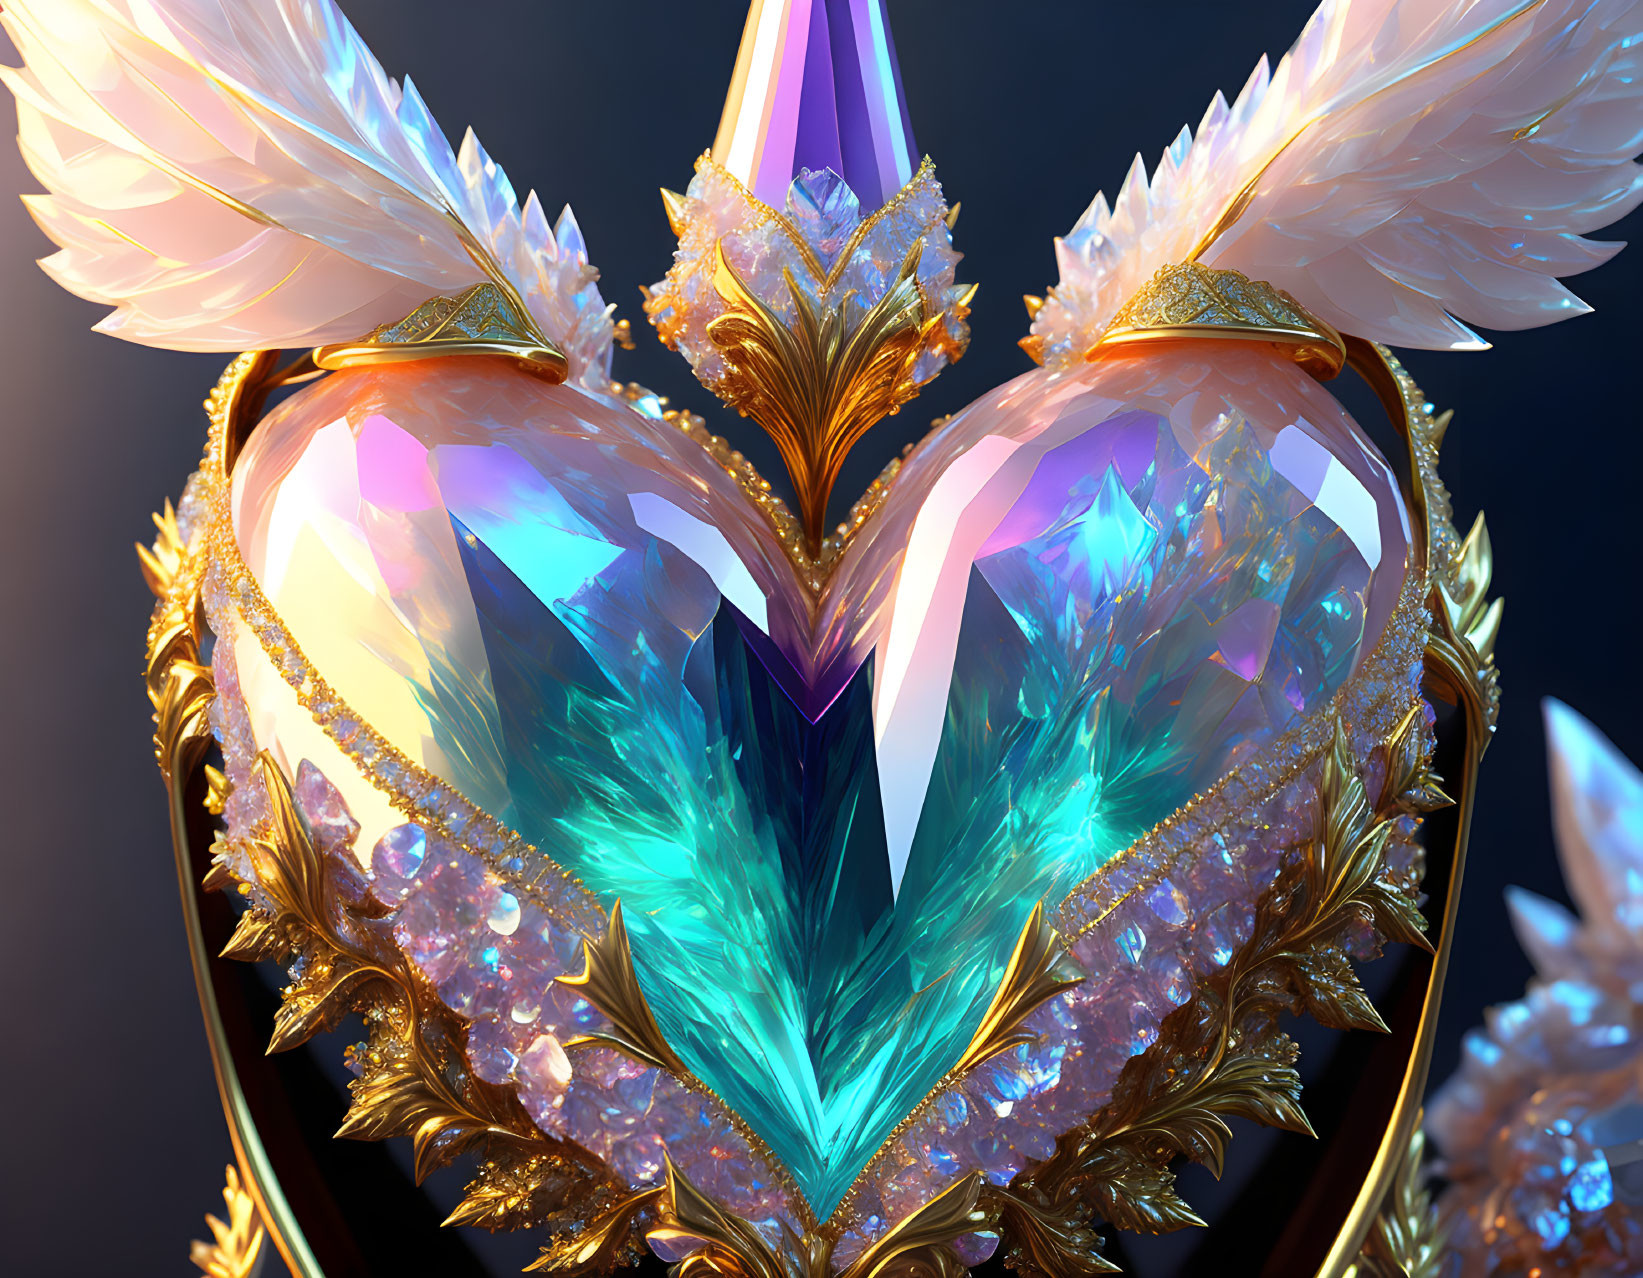 Heart-shaped gem with golden ornaments and feathered wings - a mystical and luxurious design.